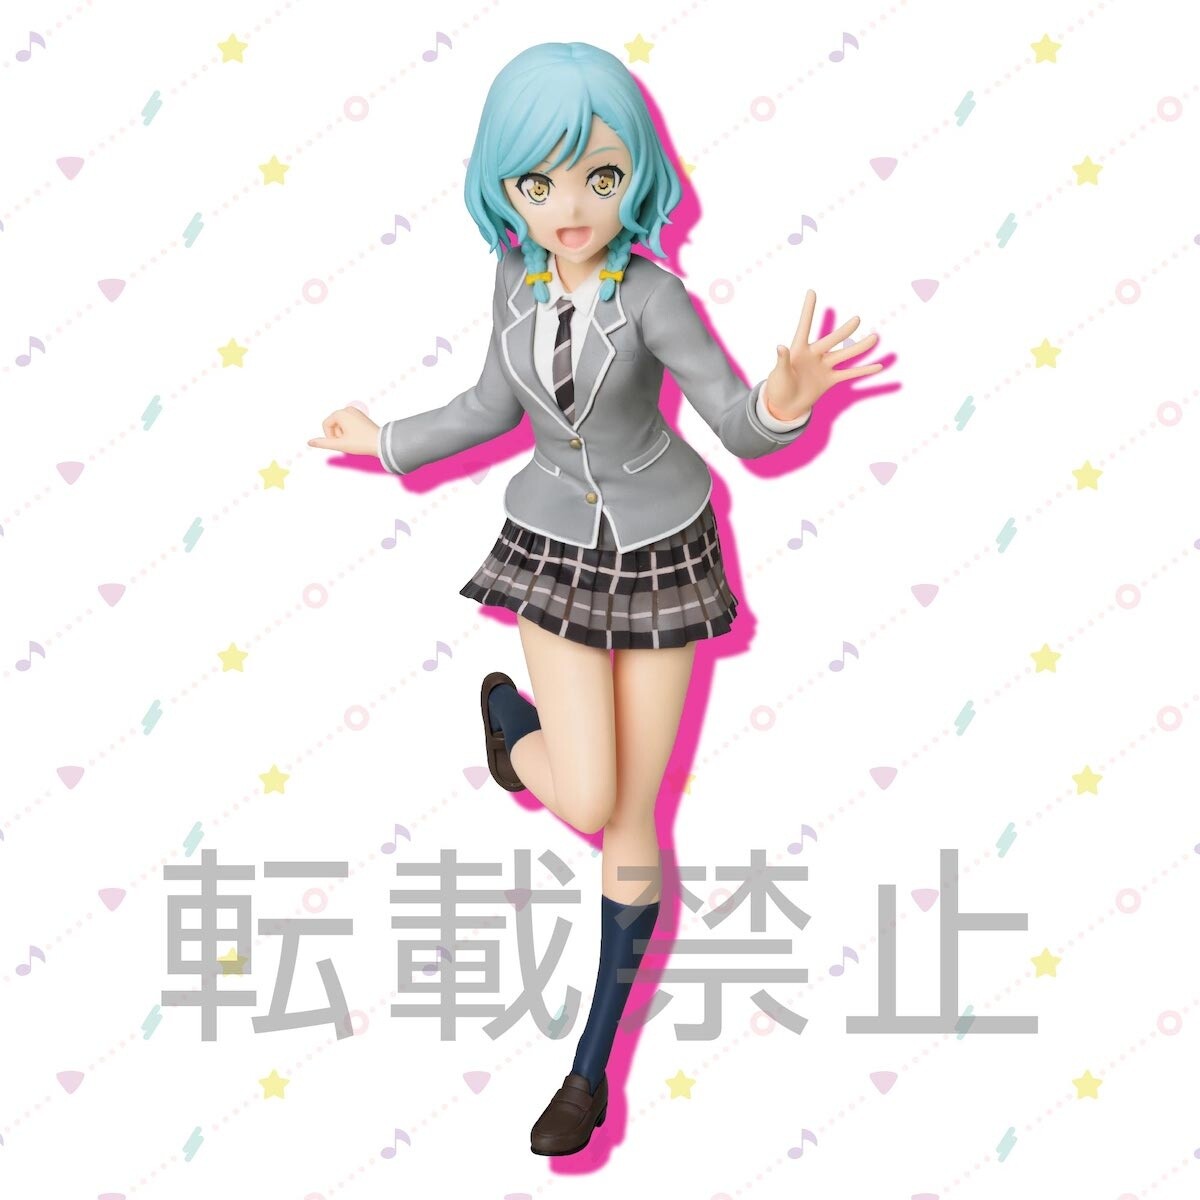 DMCMX Figure Bang Dream! Anime Game Character Model Hikawa Hina College  Uniform Static Character Desktop Decoration PVC Material 21cm Chassis  Decoration : : Toys & Games